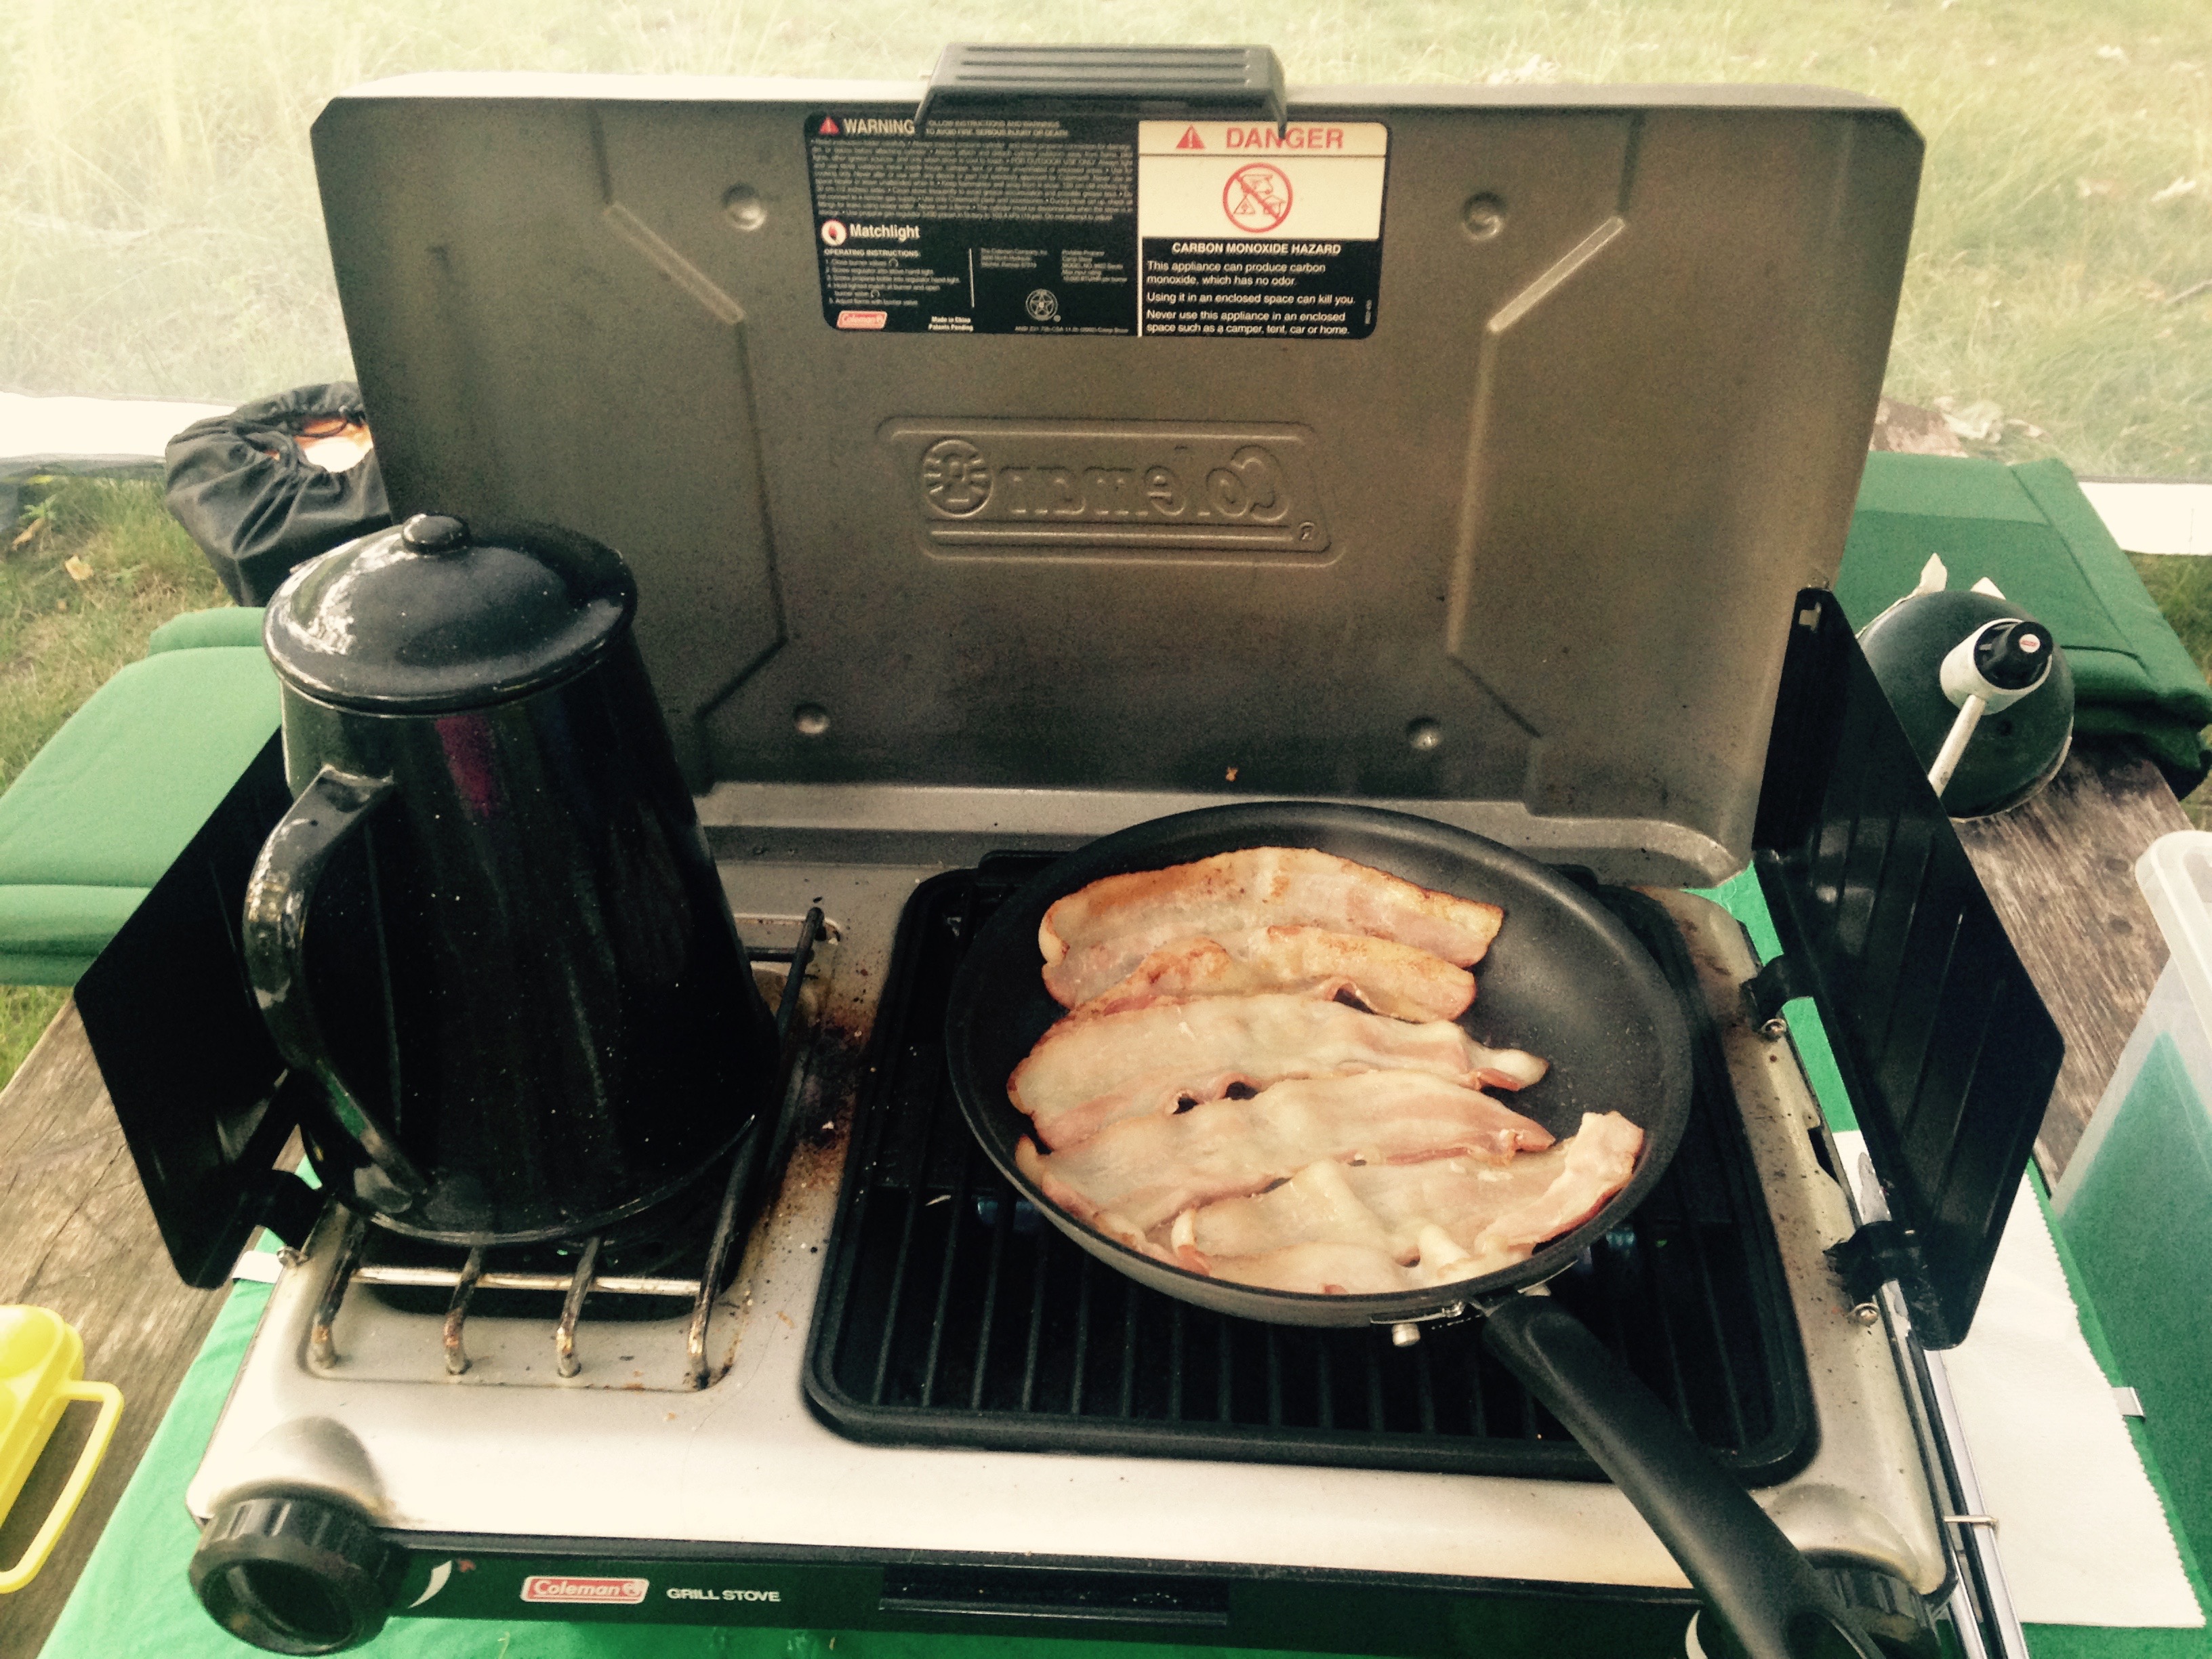 my coleman stove that I love dearly! Makes cooking so easy when camping! 